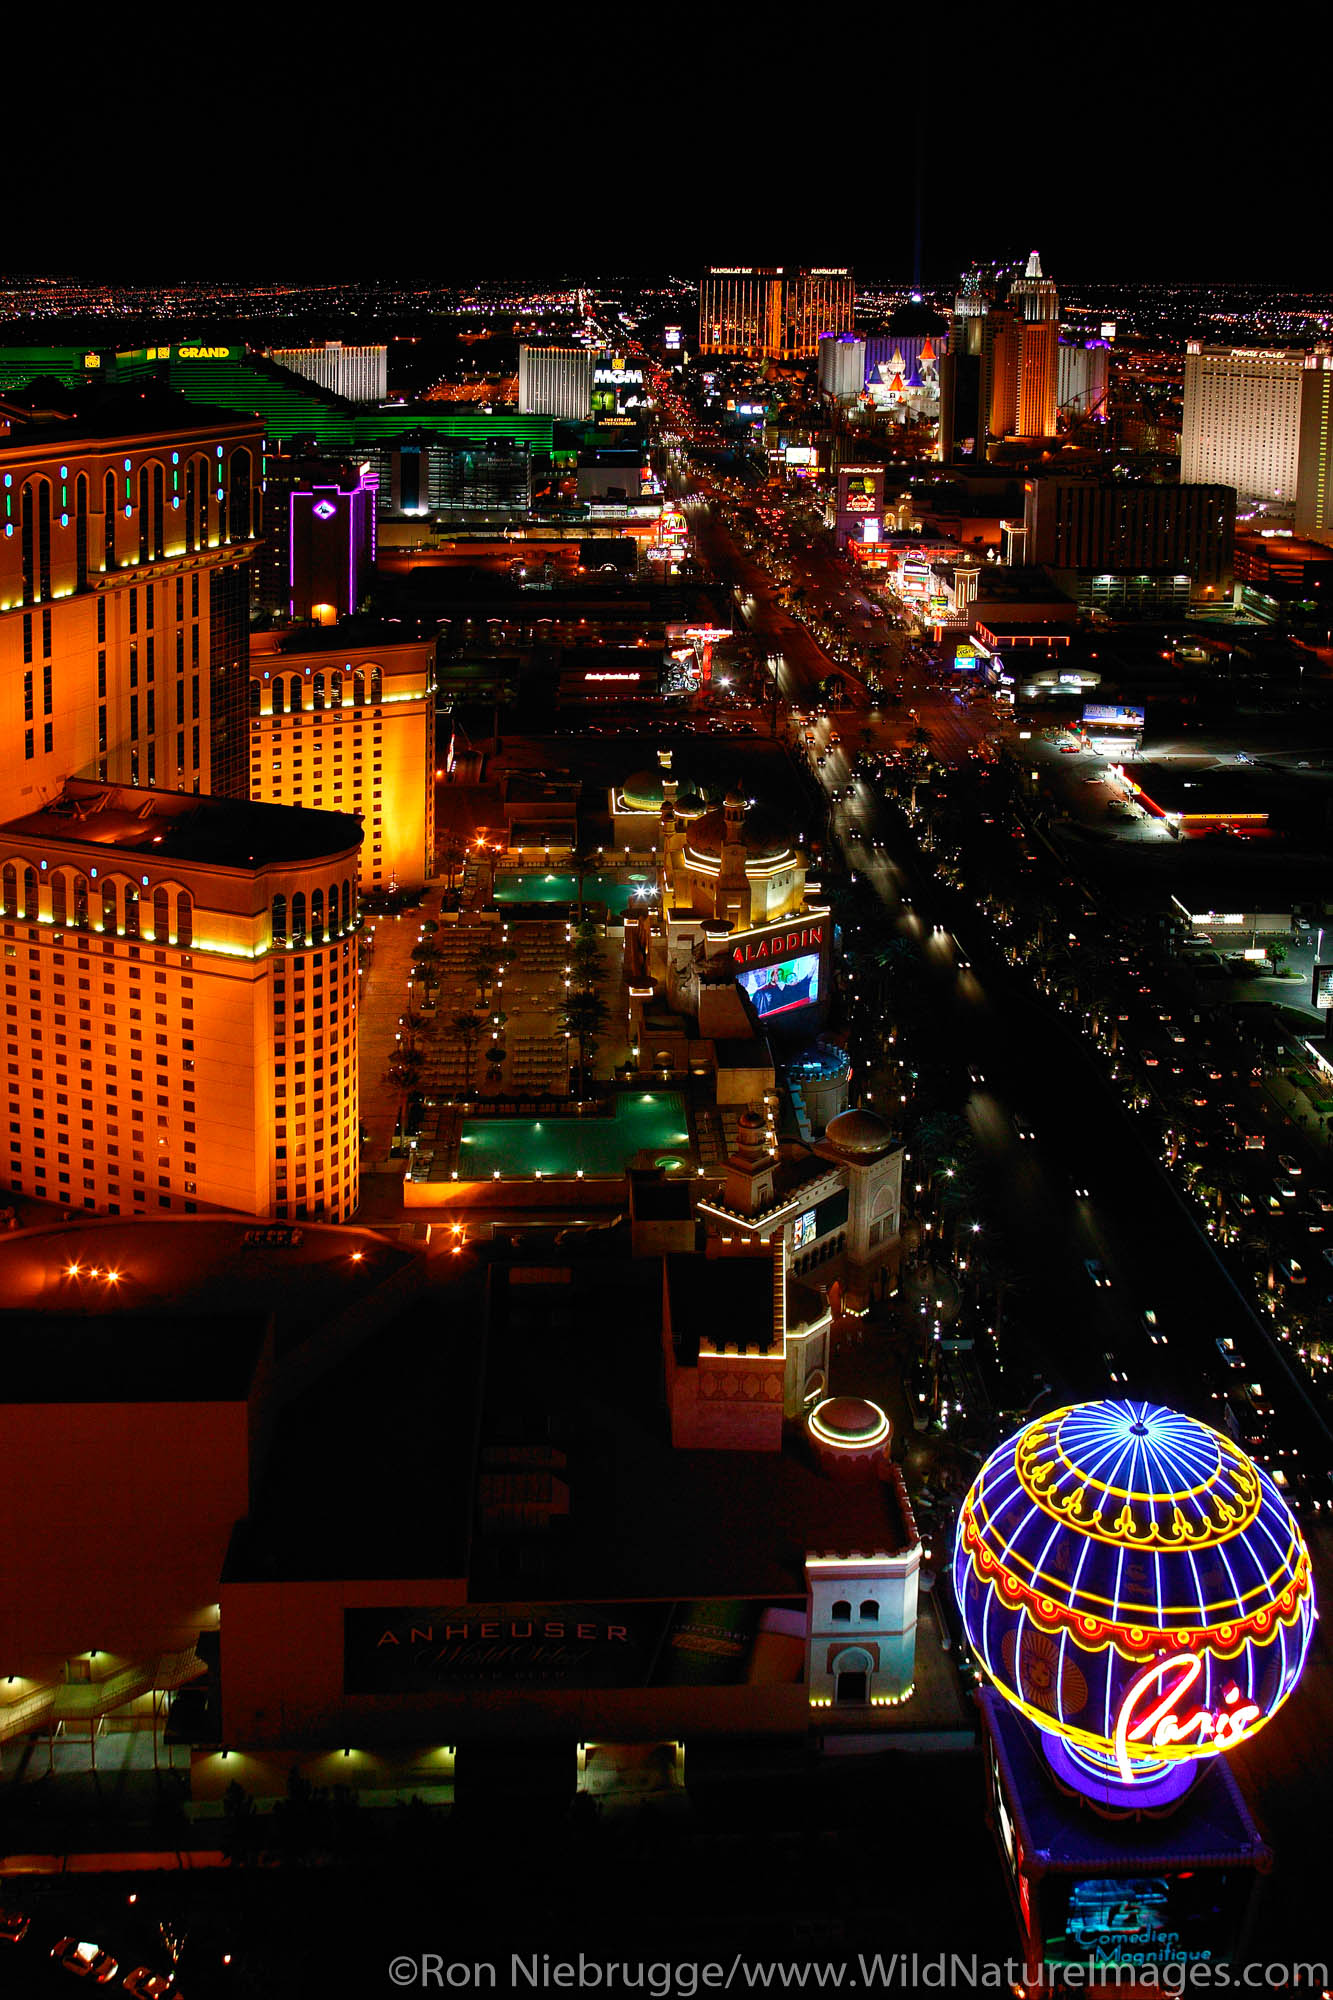 The view of the strip from the Eiffel Tower at the Paris resort hotel and casino in Las Vegas, Nevada.